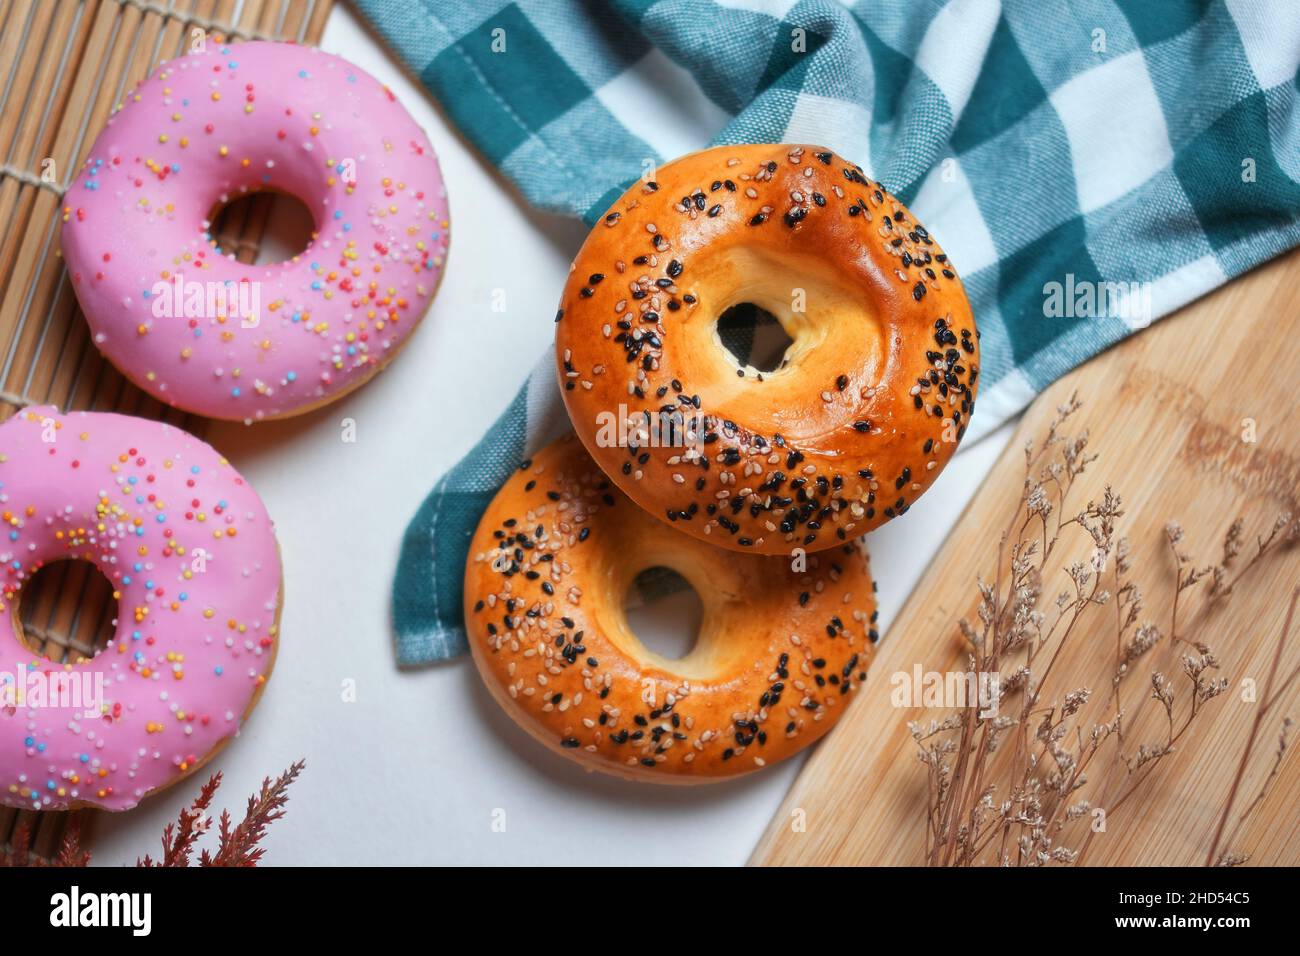 Close-up view of sesame seed and glazed donuts on the table Stock Photo